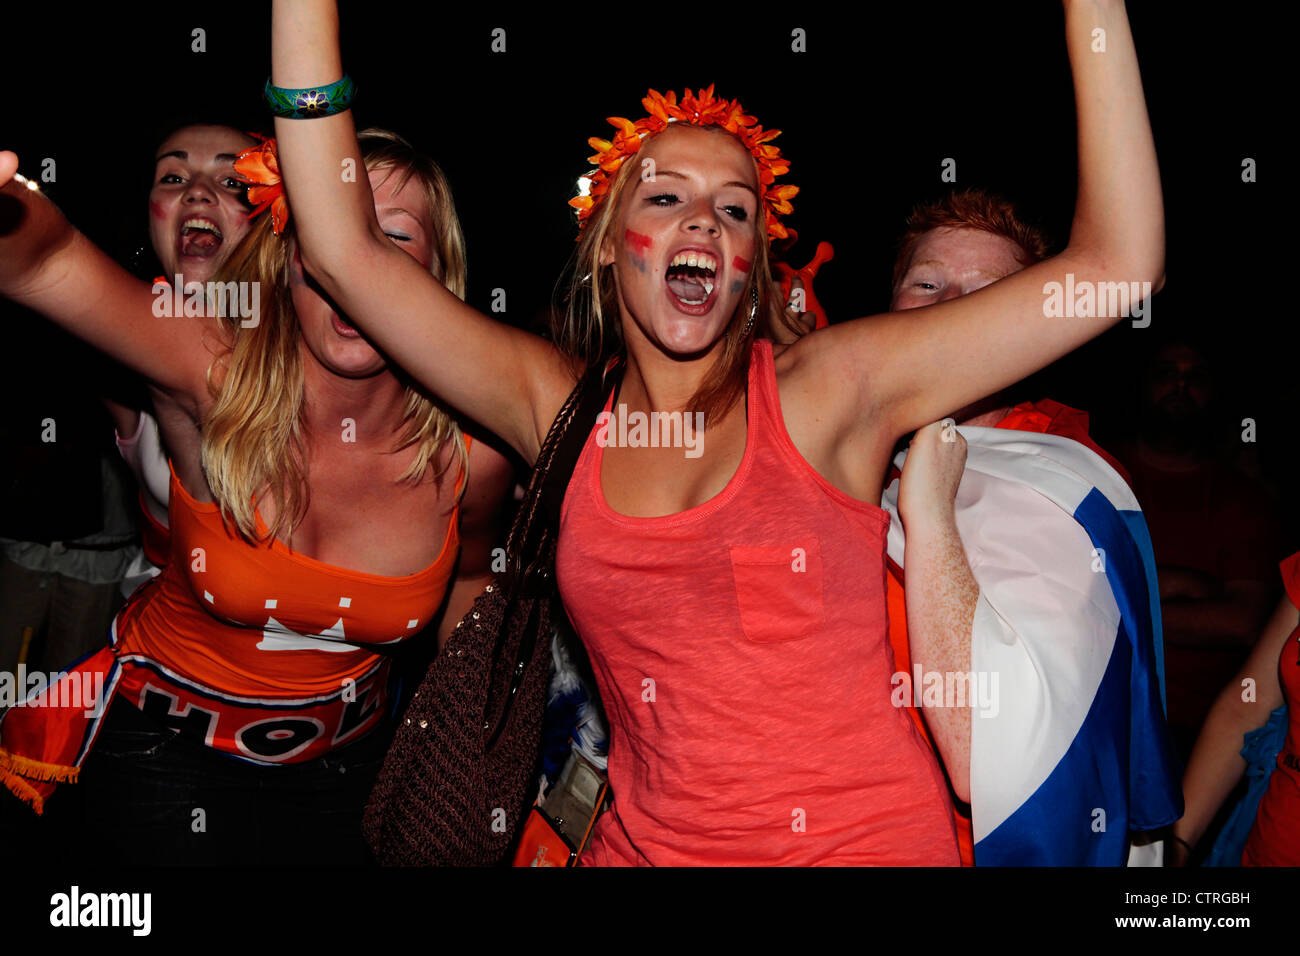 Joyful Dutch football fans celebrate after the Holland soccer team win against Argentina in  World Cup semi finals, 2010 Stock Photo